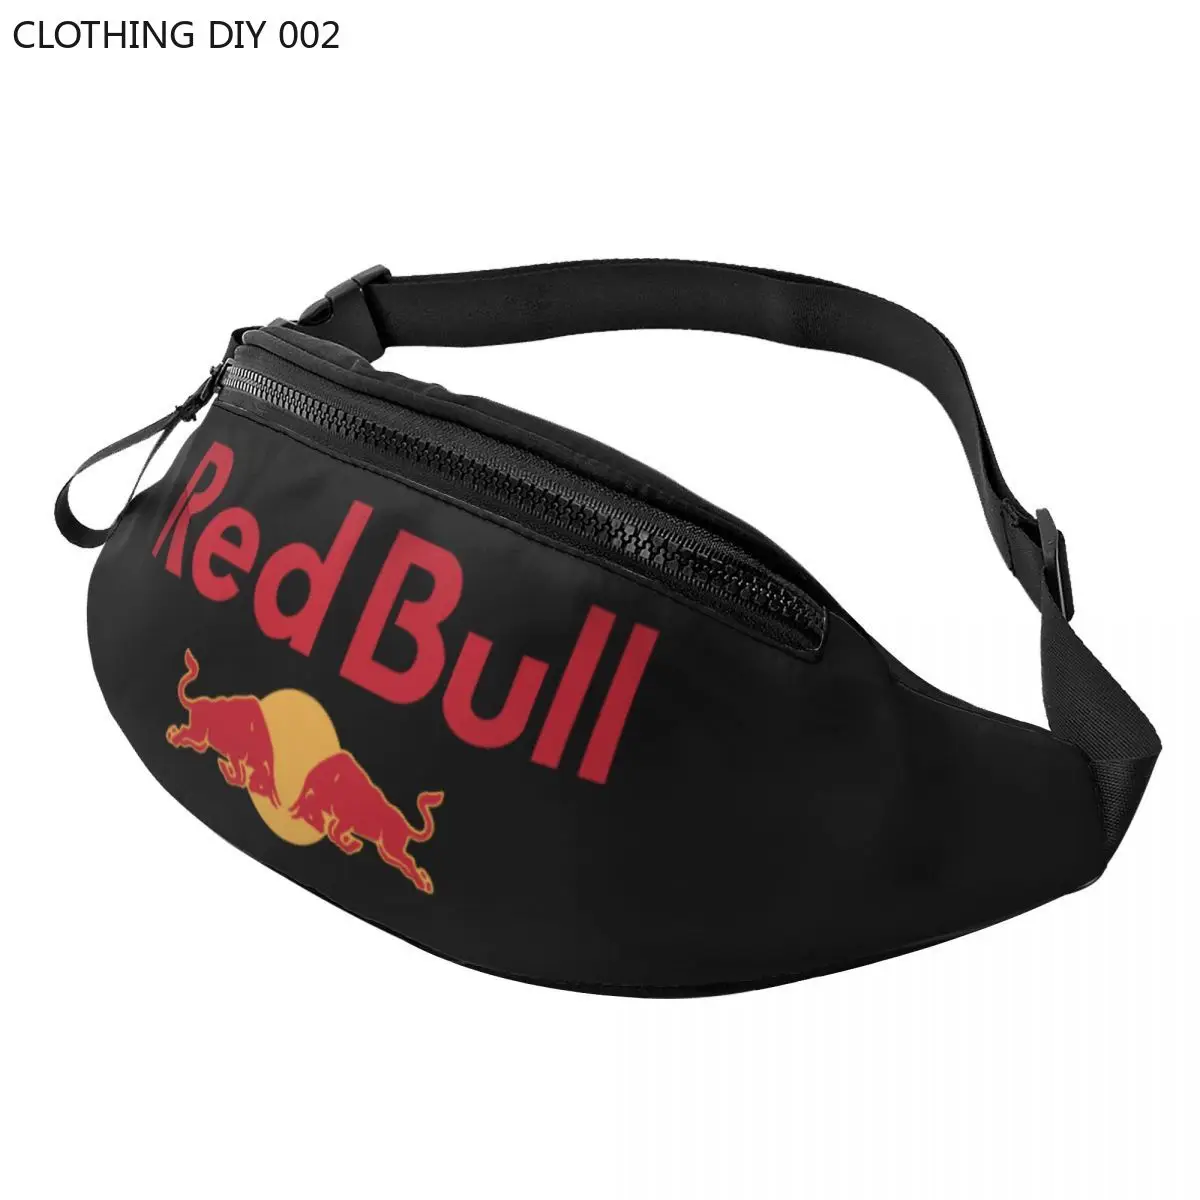 

Customized Red Double-Bull Fanny Pack for Men Women Fashion Crossbody Waist Bag Traveling Phone Money Pouch